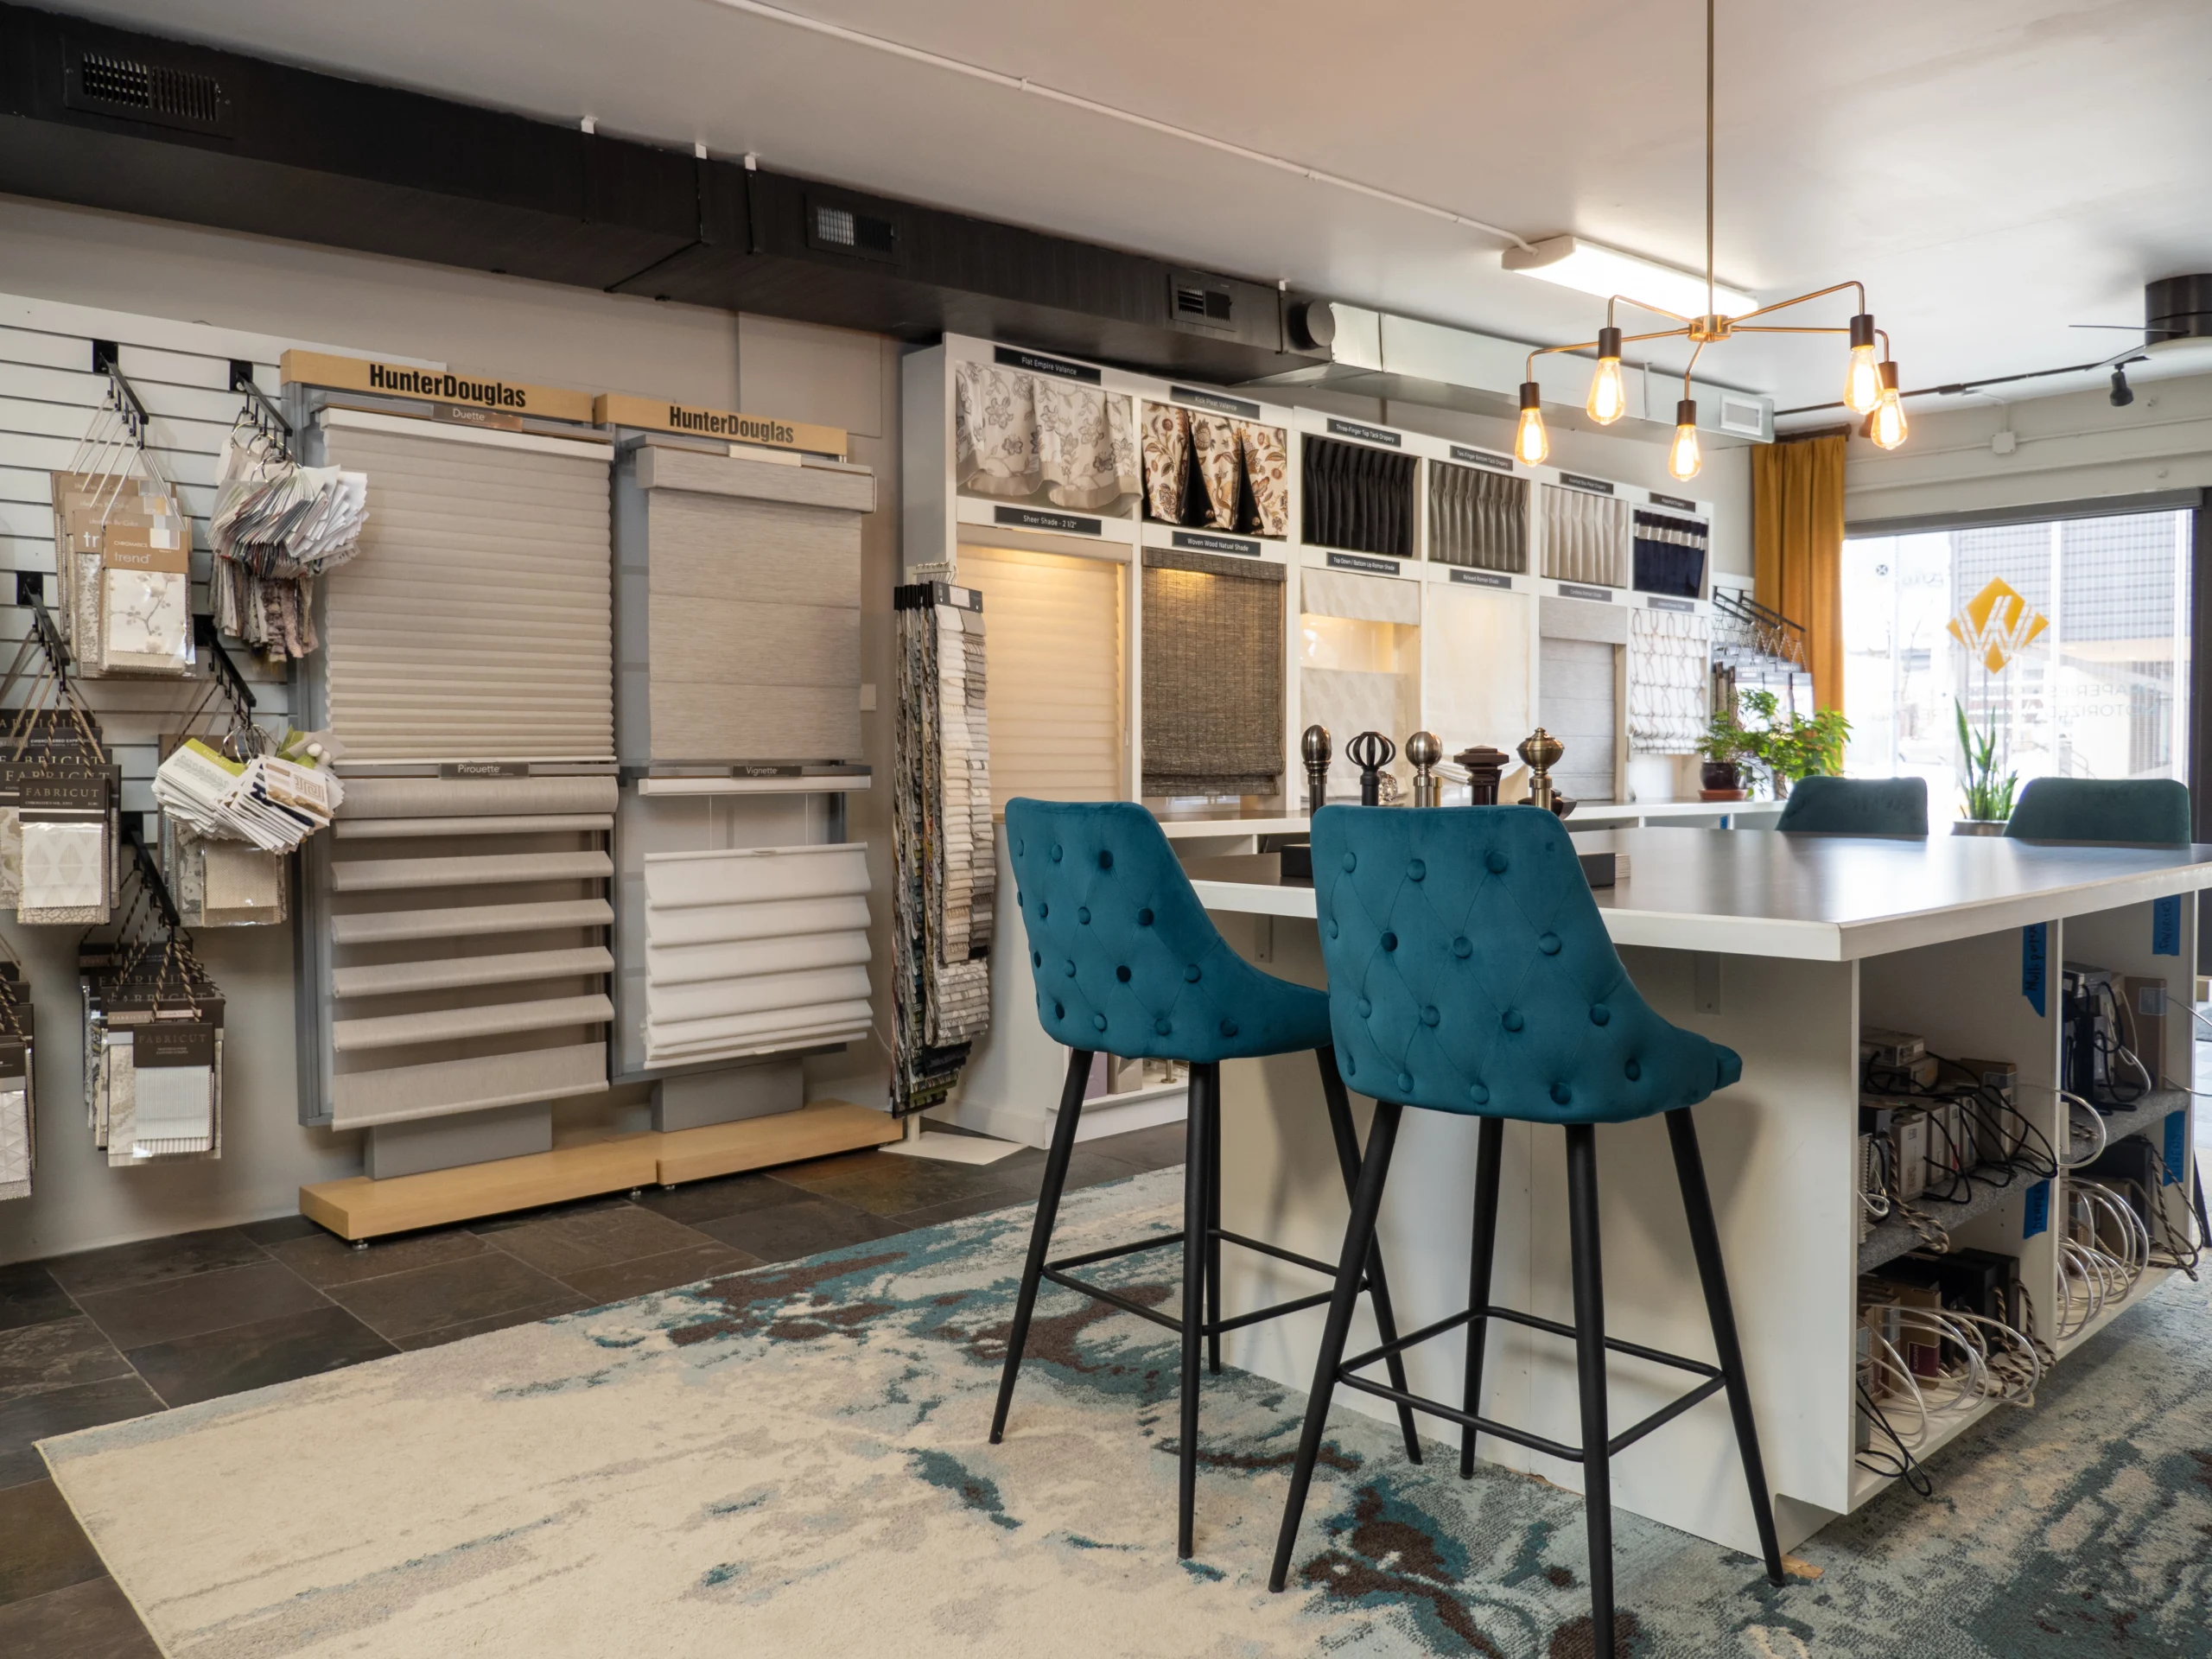 Modern interior design showroom in Denver with various fabric samples, stylish blue stools at a white counter, and elegant lighting fixtures.